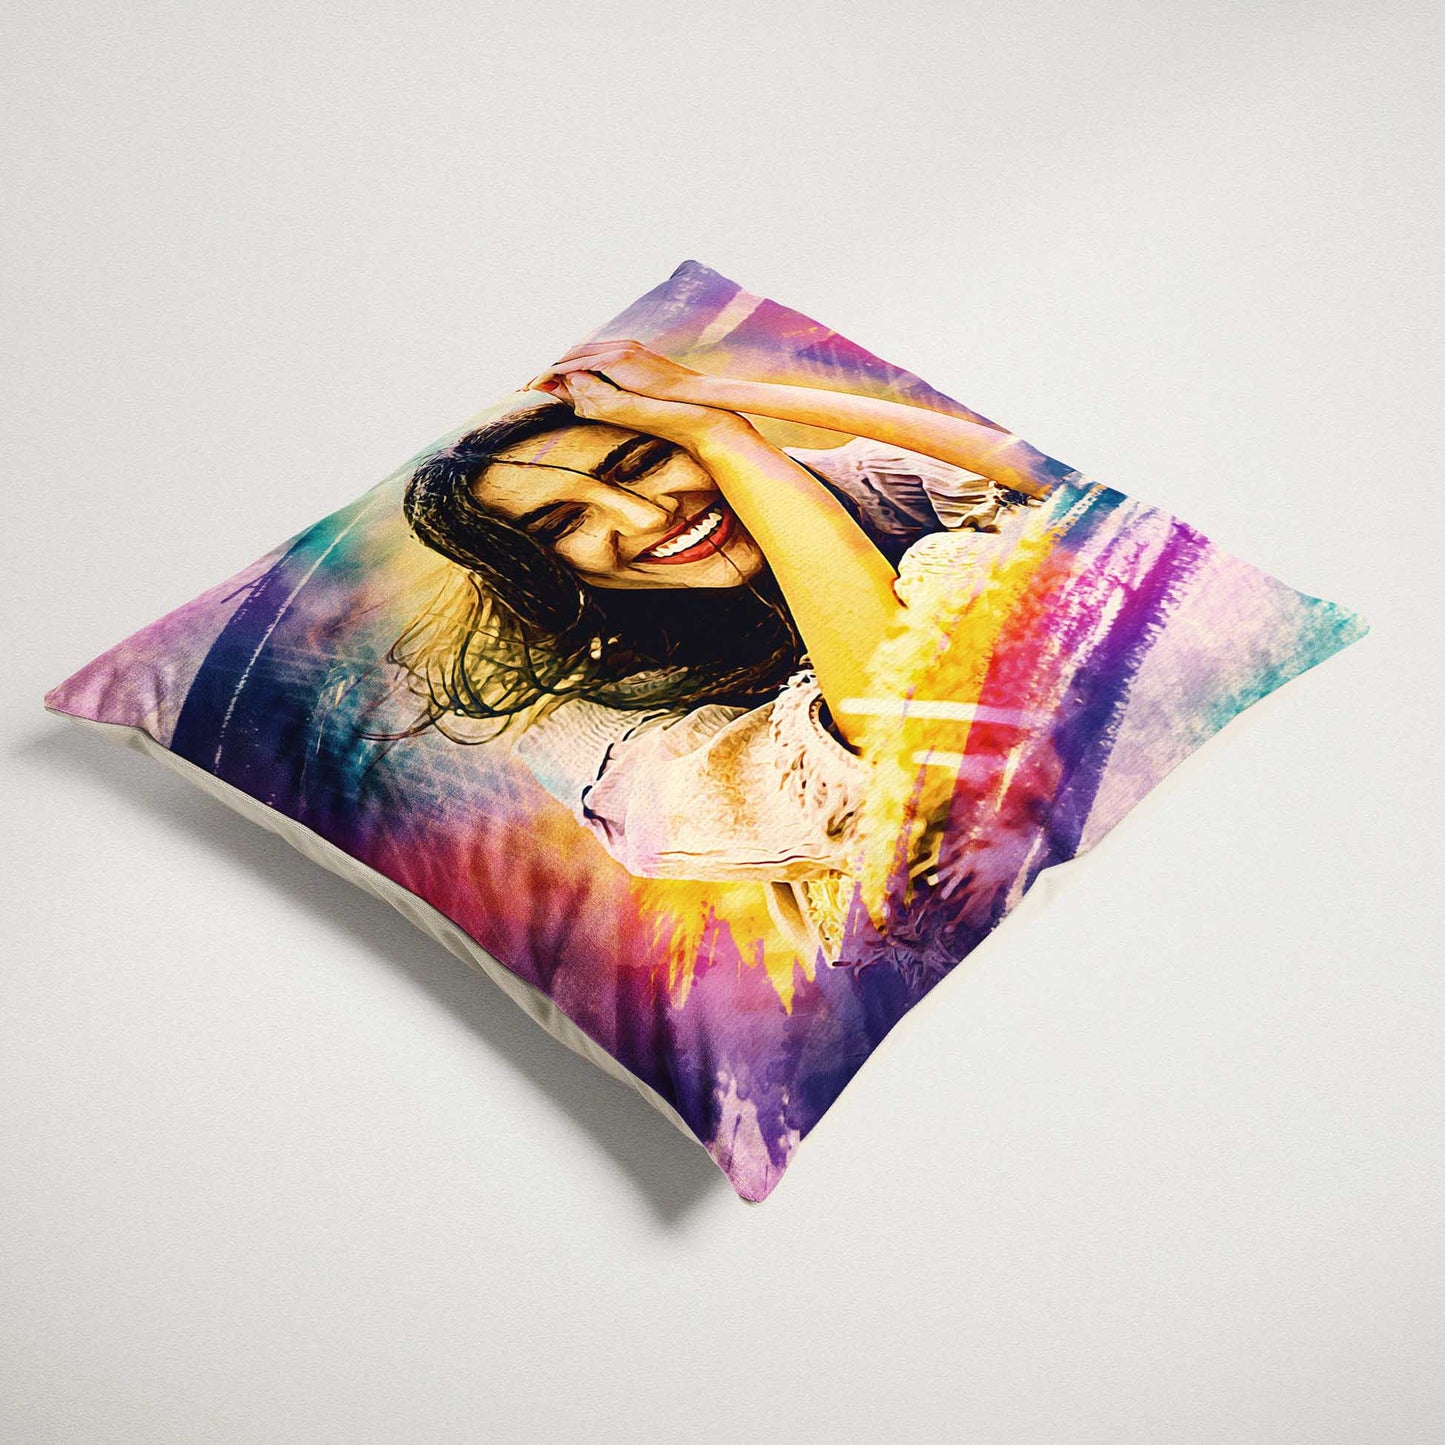 Transform your living space into an art gallery with the Personalised Artistic Brush Painting Cushion. Made from soft velvet fabric and printed with a design derived from your photo, this handmade cushion is a creative and original idea